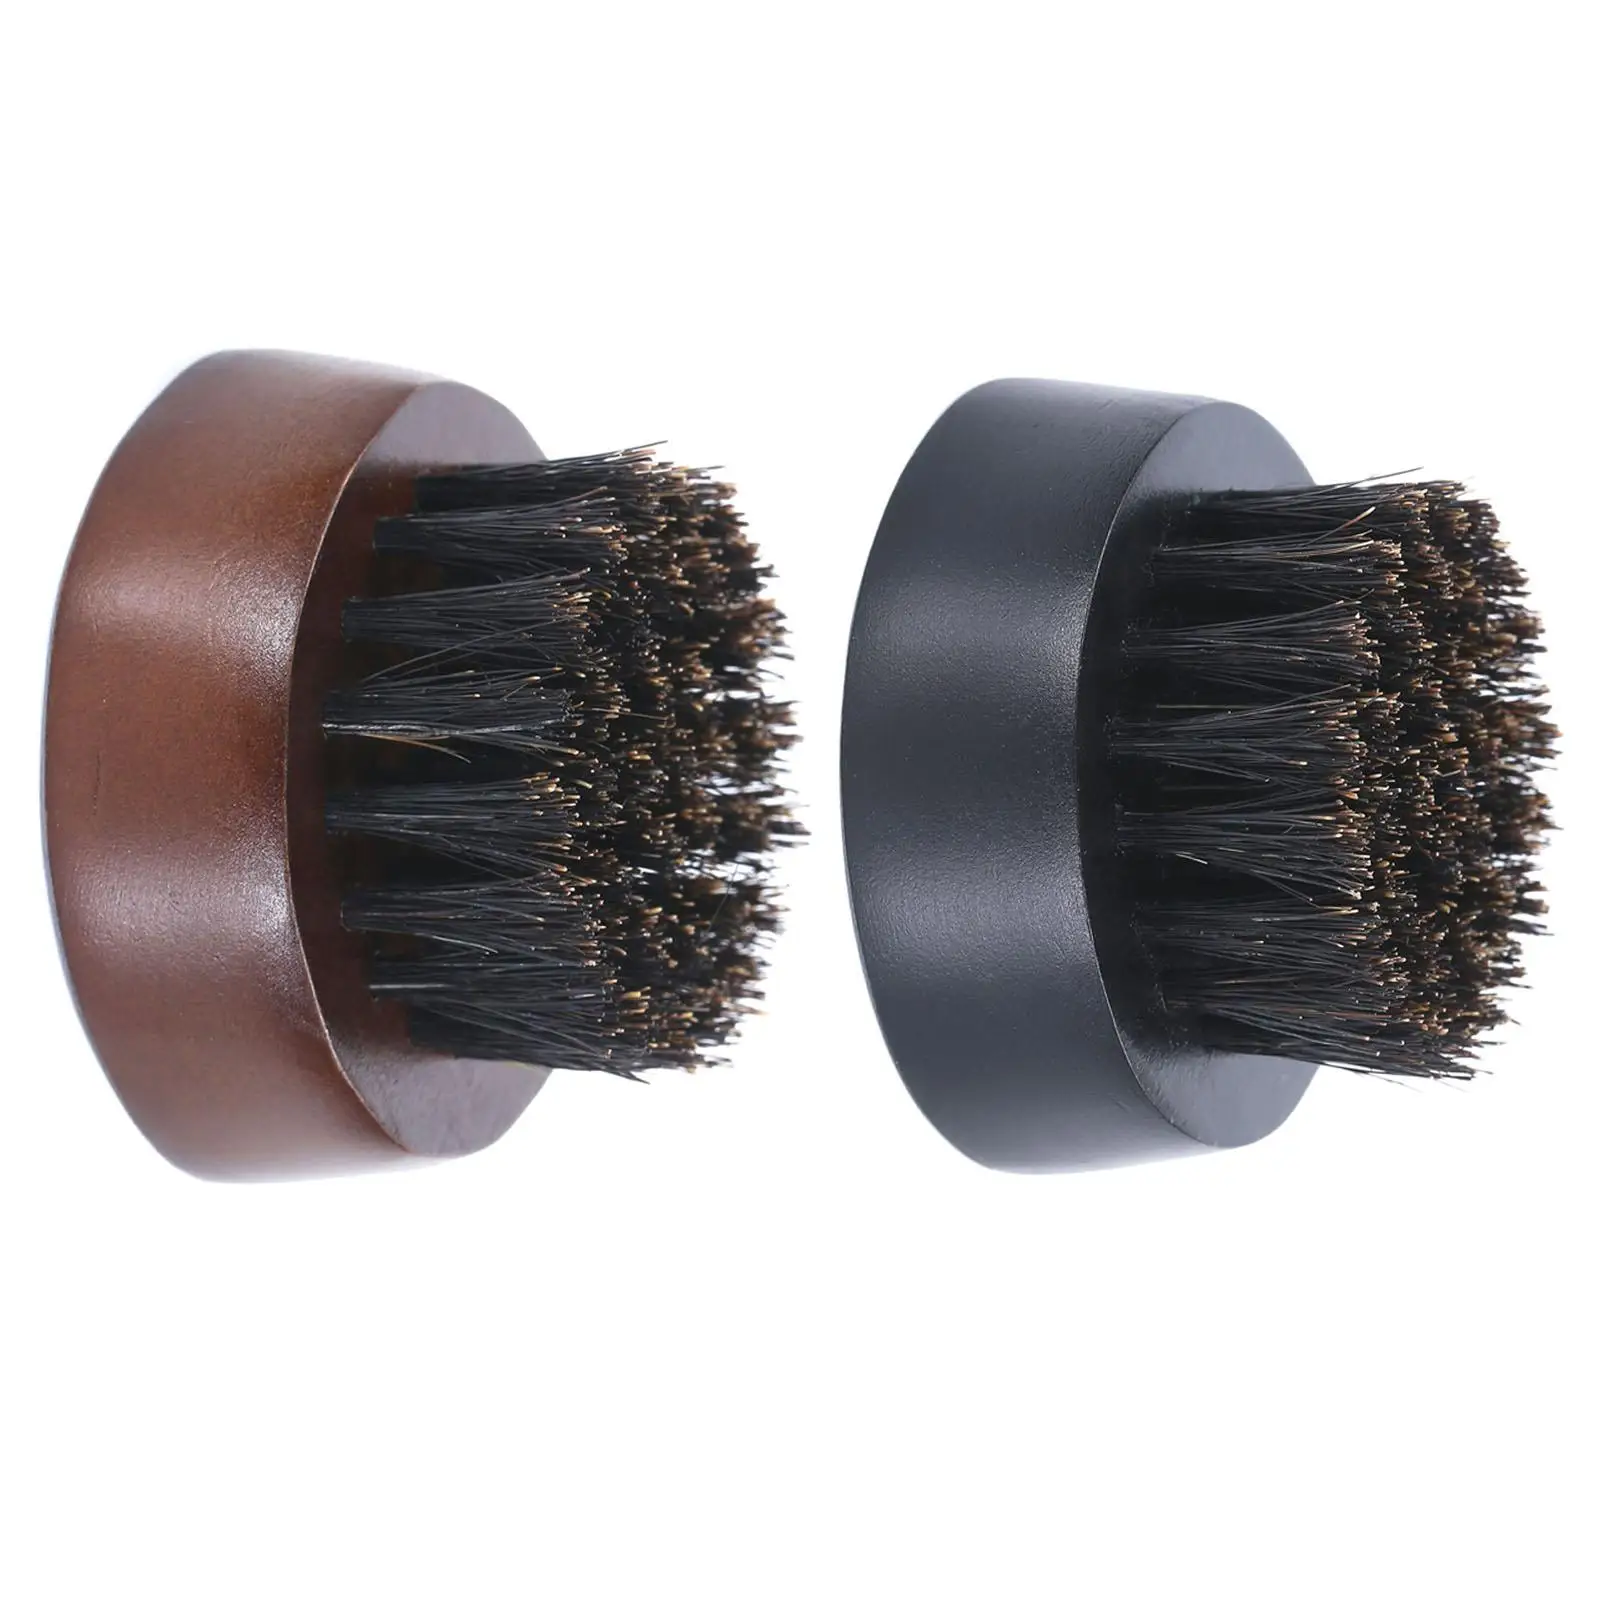 2 Pack Round Wood Beard Brush Styling Combs for Men Soften Facial Hair